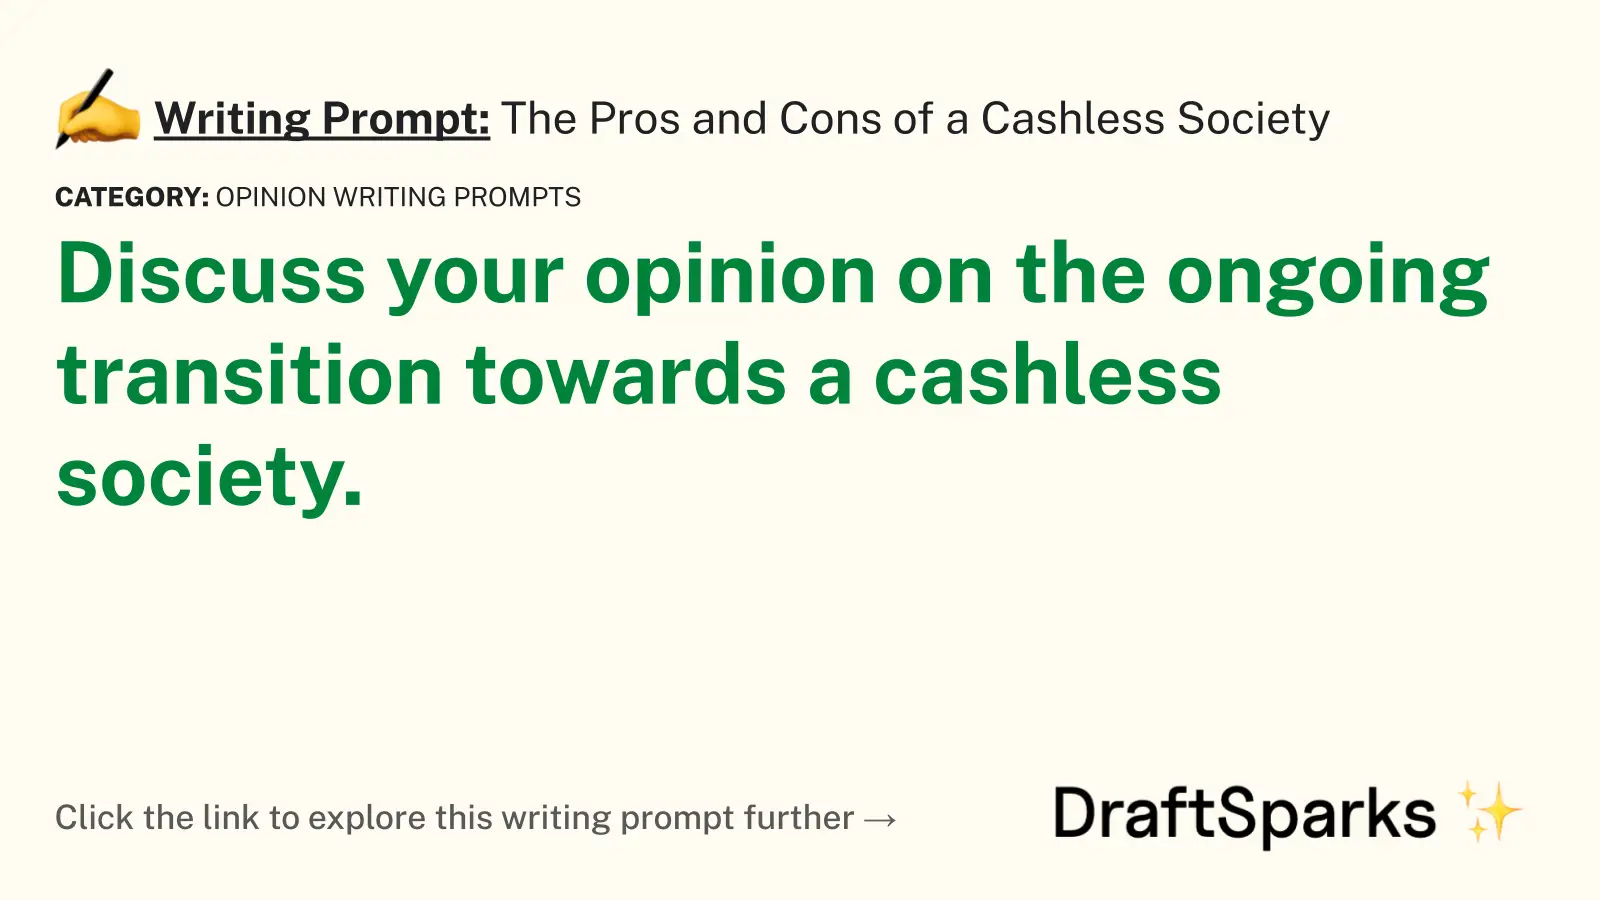 The Pros and Cons of a Cashless Society